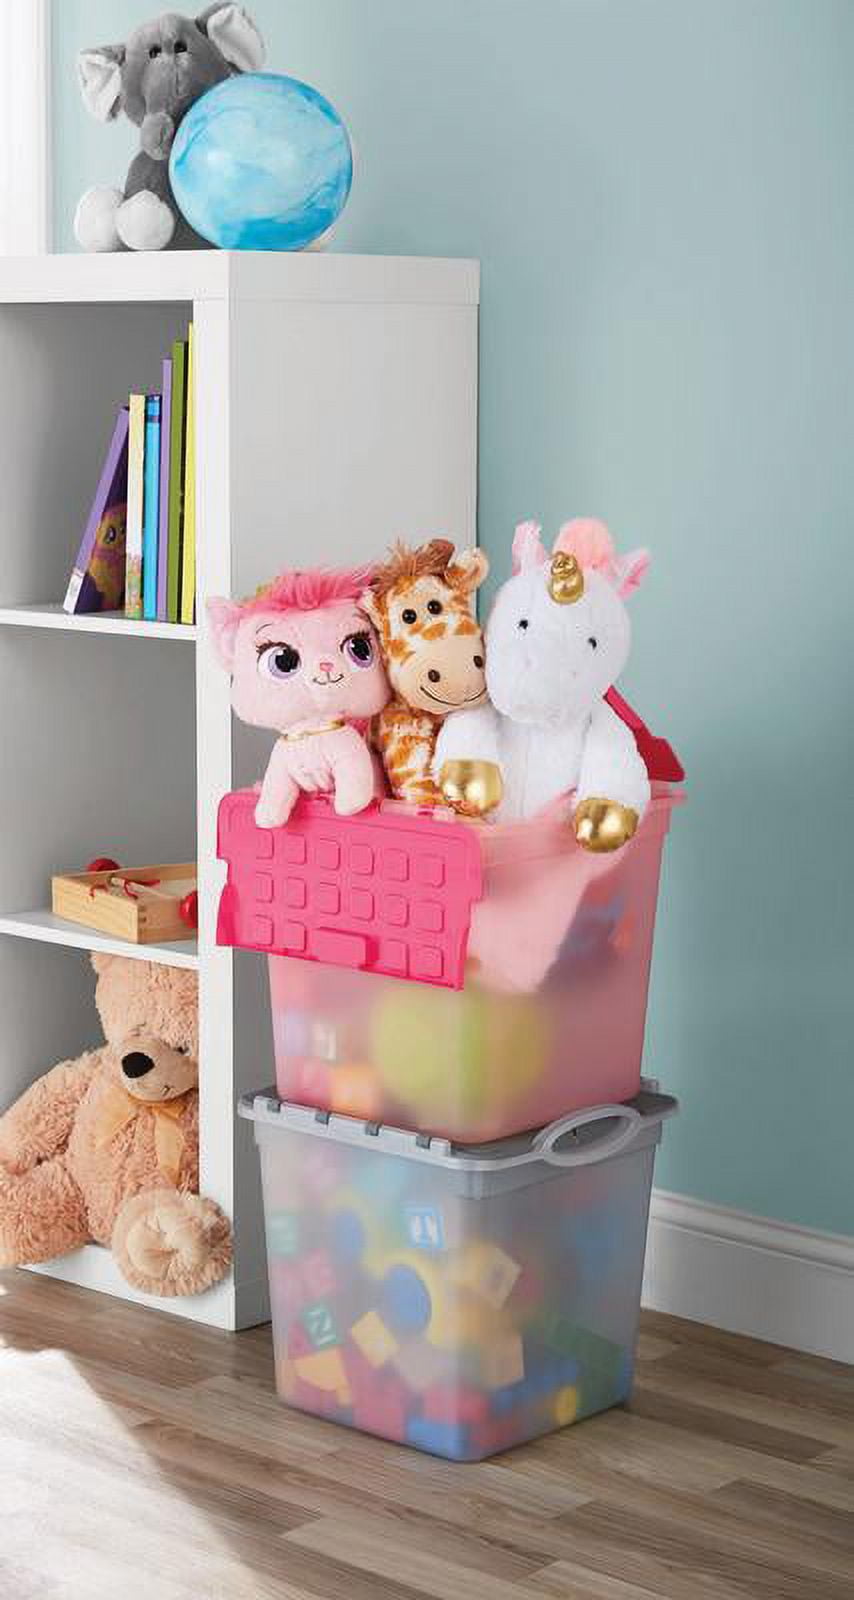 25 Cute Storage Bins and Baskets for Your Child's Room — LE BUMP